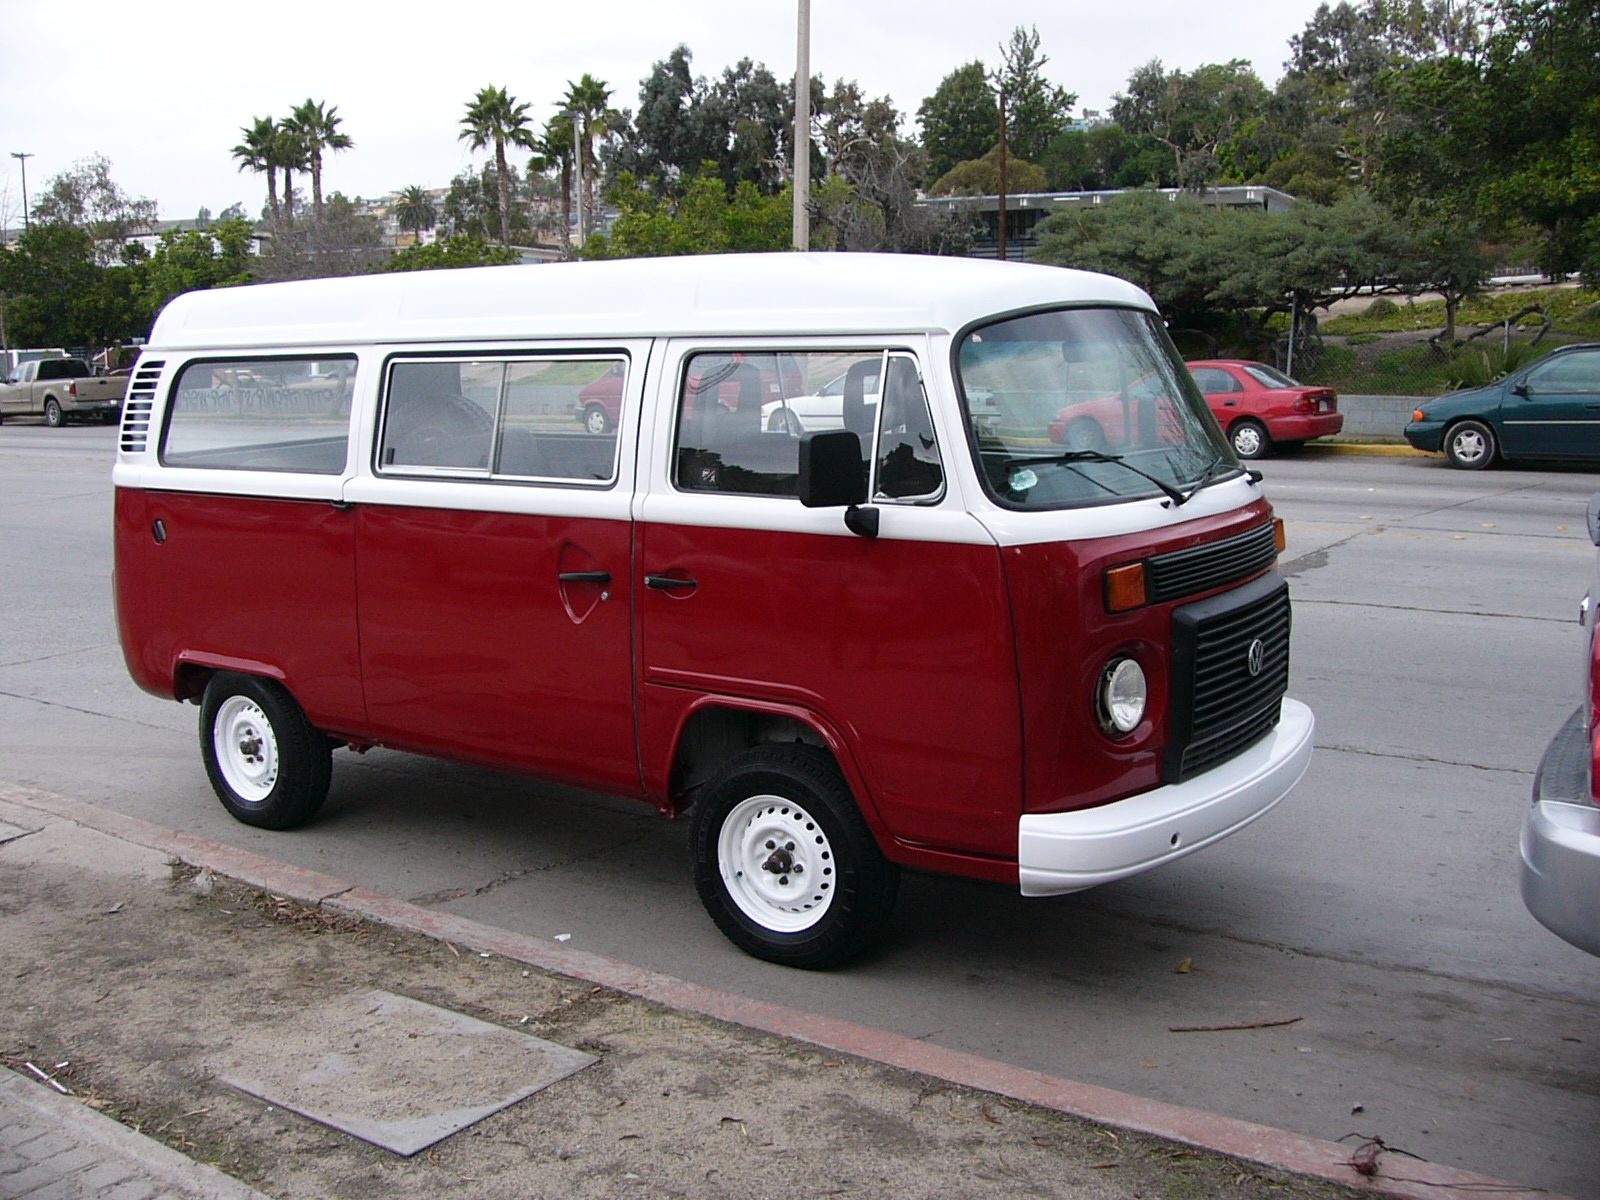 yay__another_vw_bus__by_flyinracedude-d4h7ubs.jpg